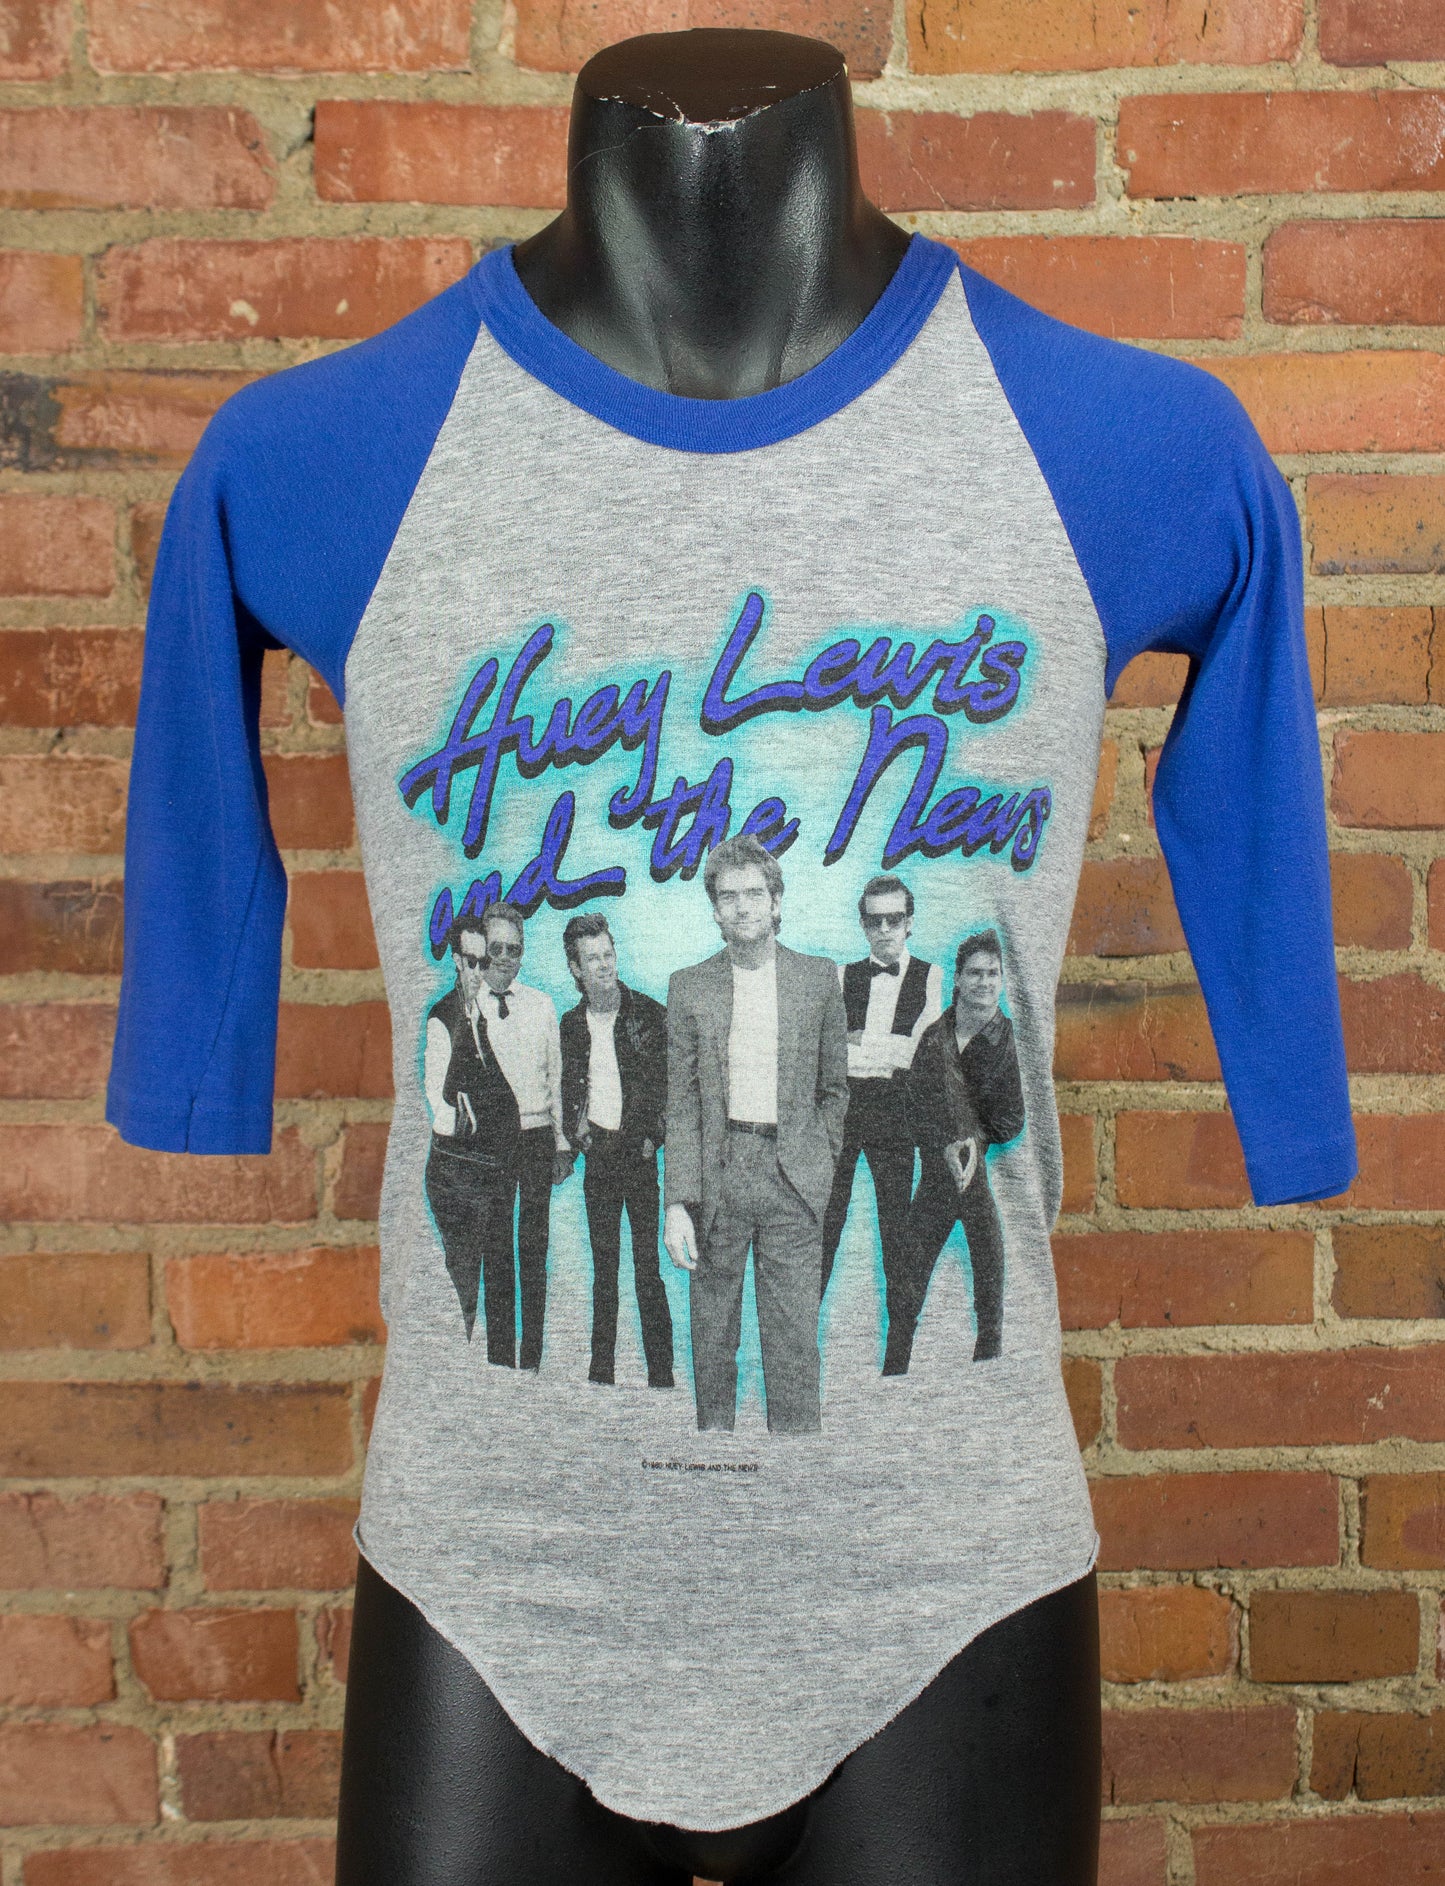 Vintage Huey Lewis and the News Concert T Shirt 1984 Sports Tour Grey and Blue Raglan Jersey XS